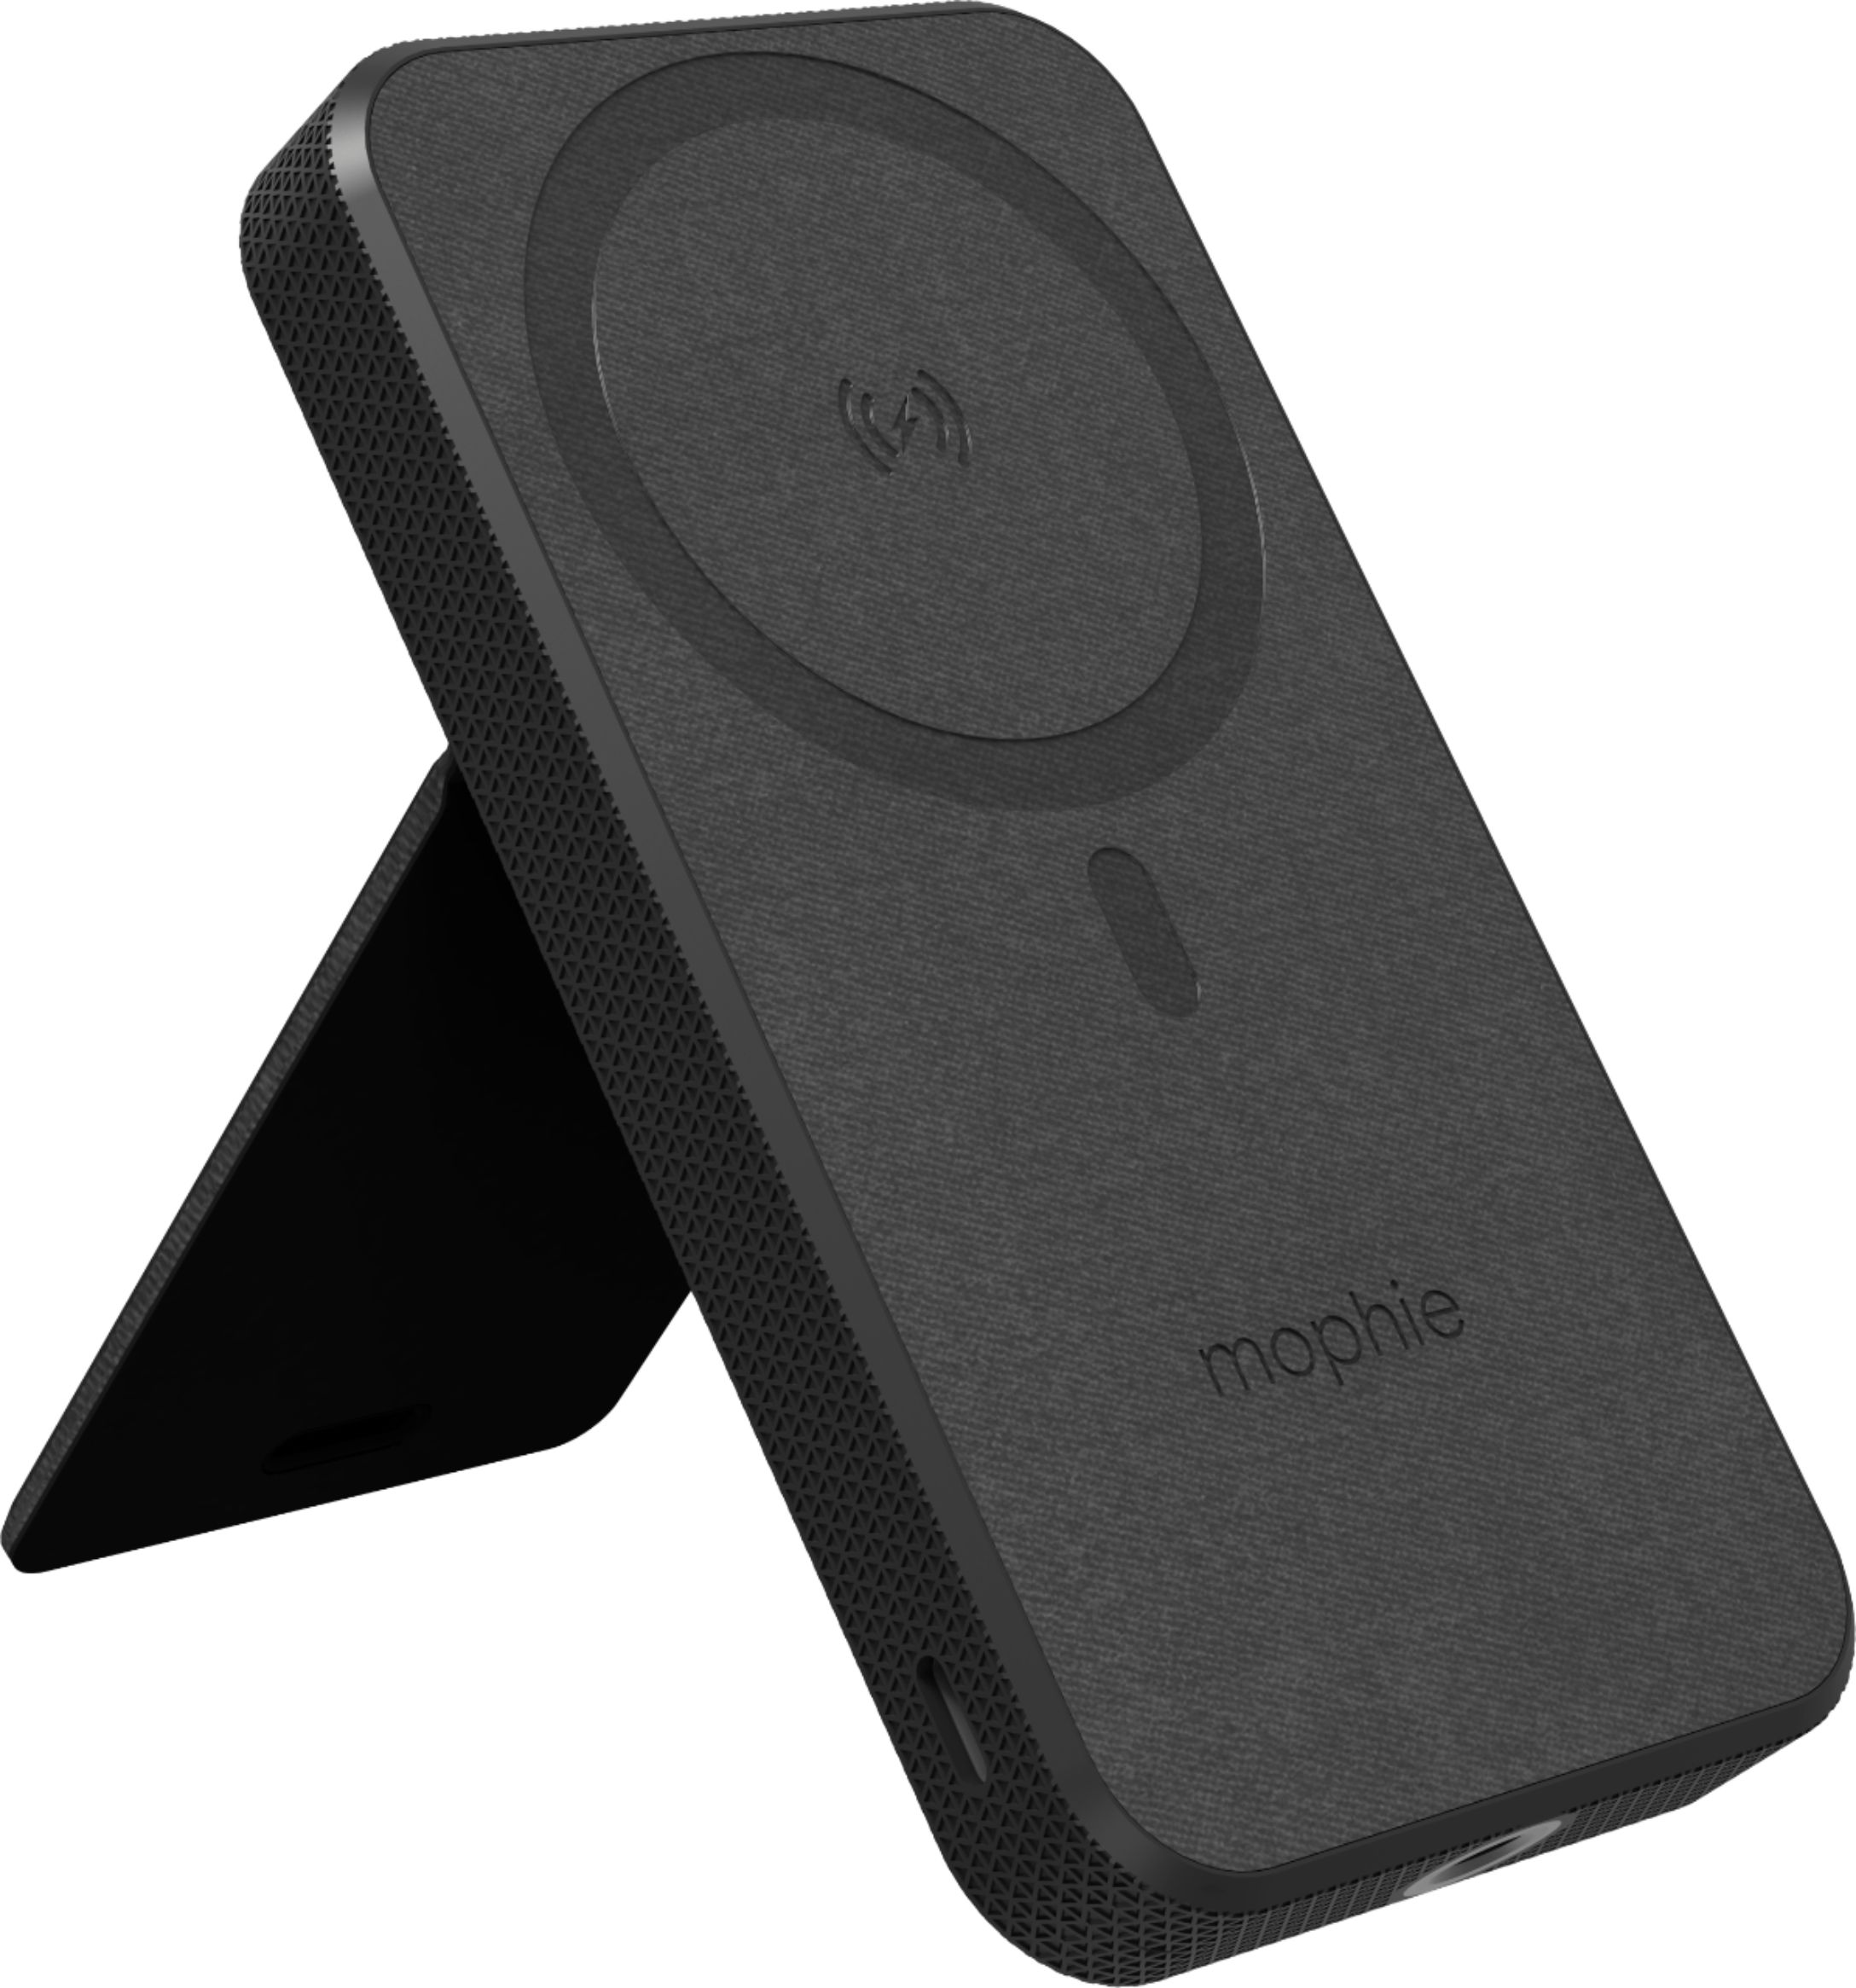 mophie Snap+ Powerstation Stand 10,000 mAh Portable with MagSafe Compatibility Black 401107913 - Best Buy